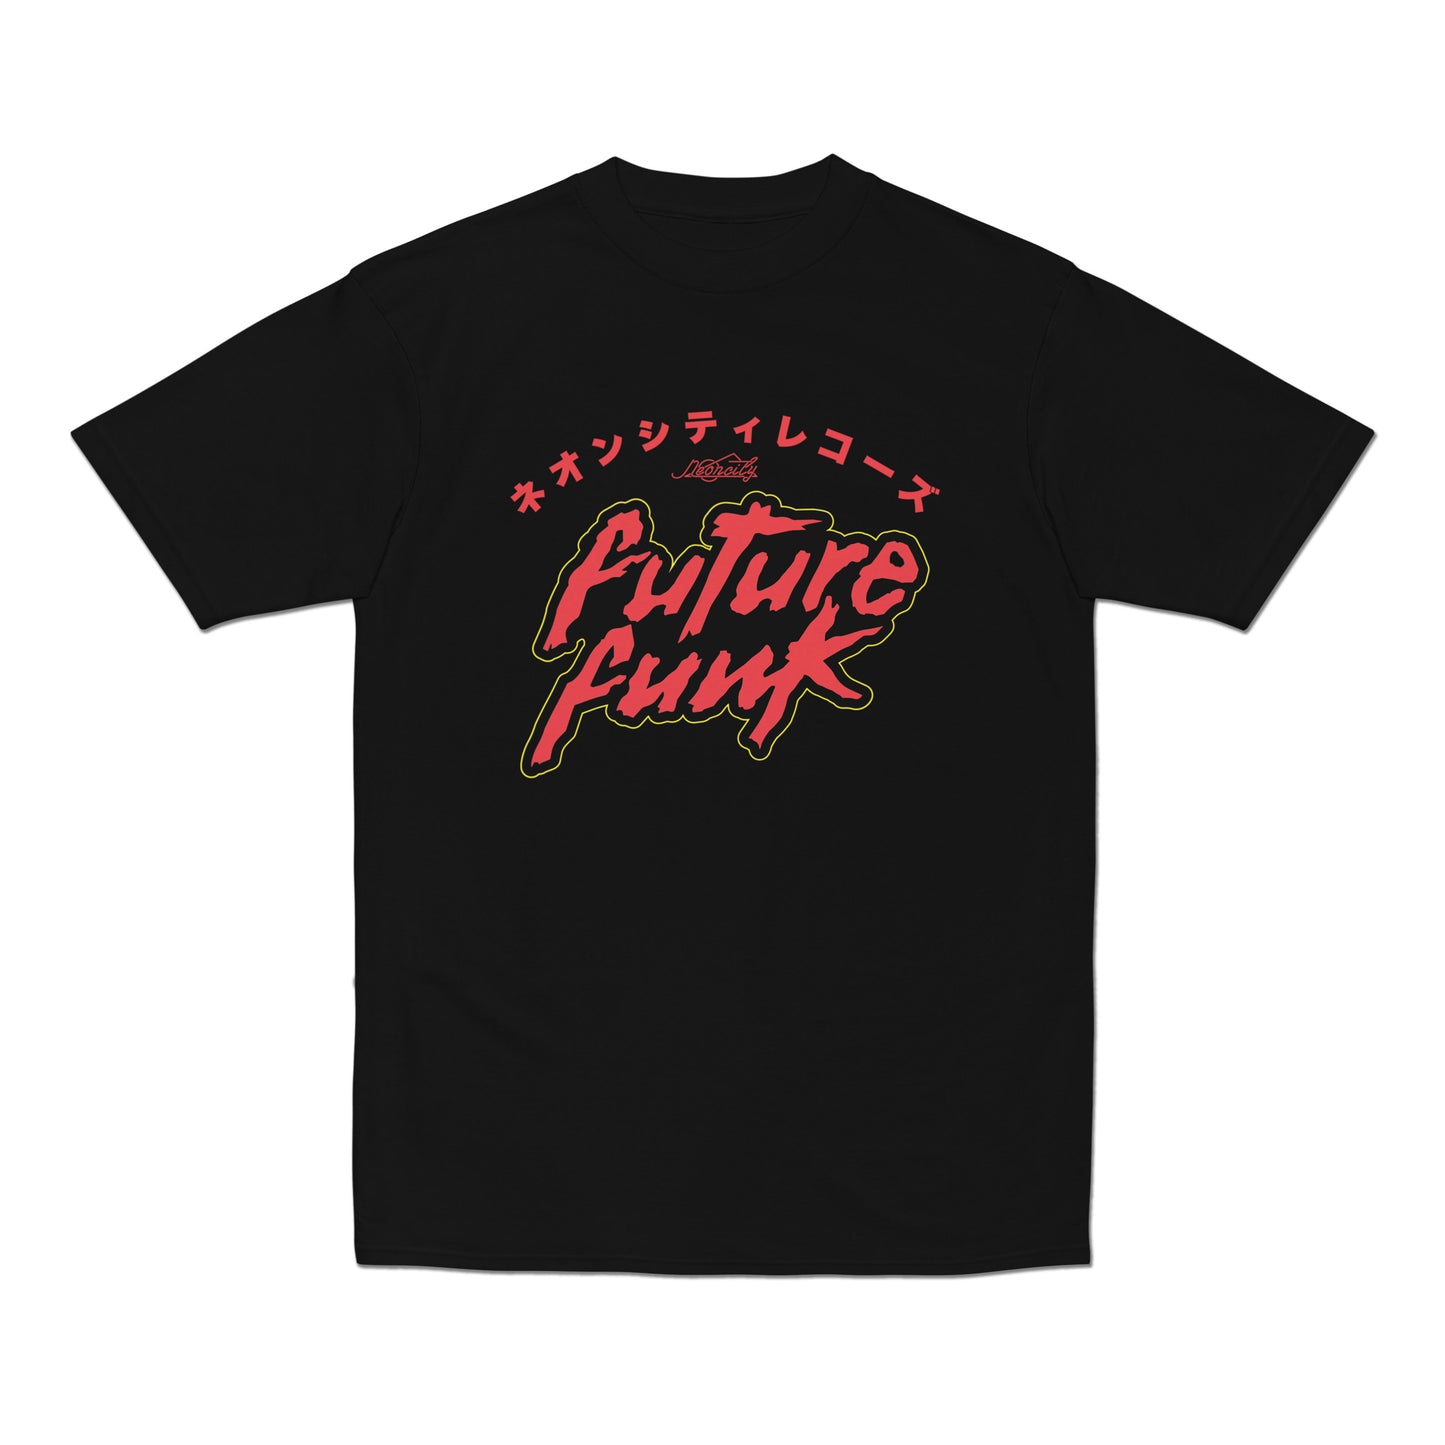 NCR "Future Funk" T-Shirt - Neoncity Records